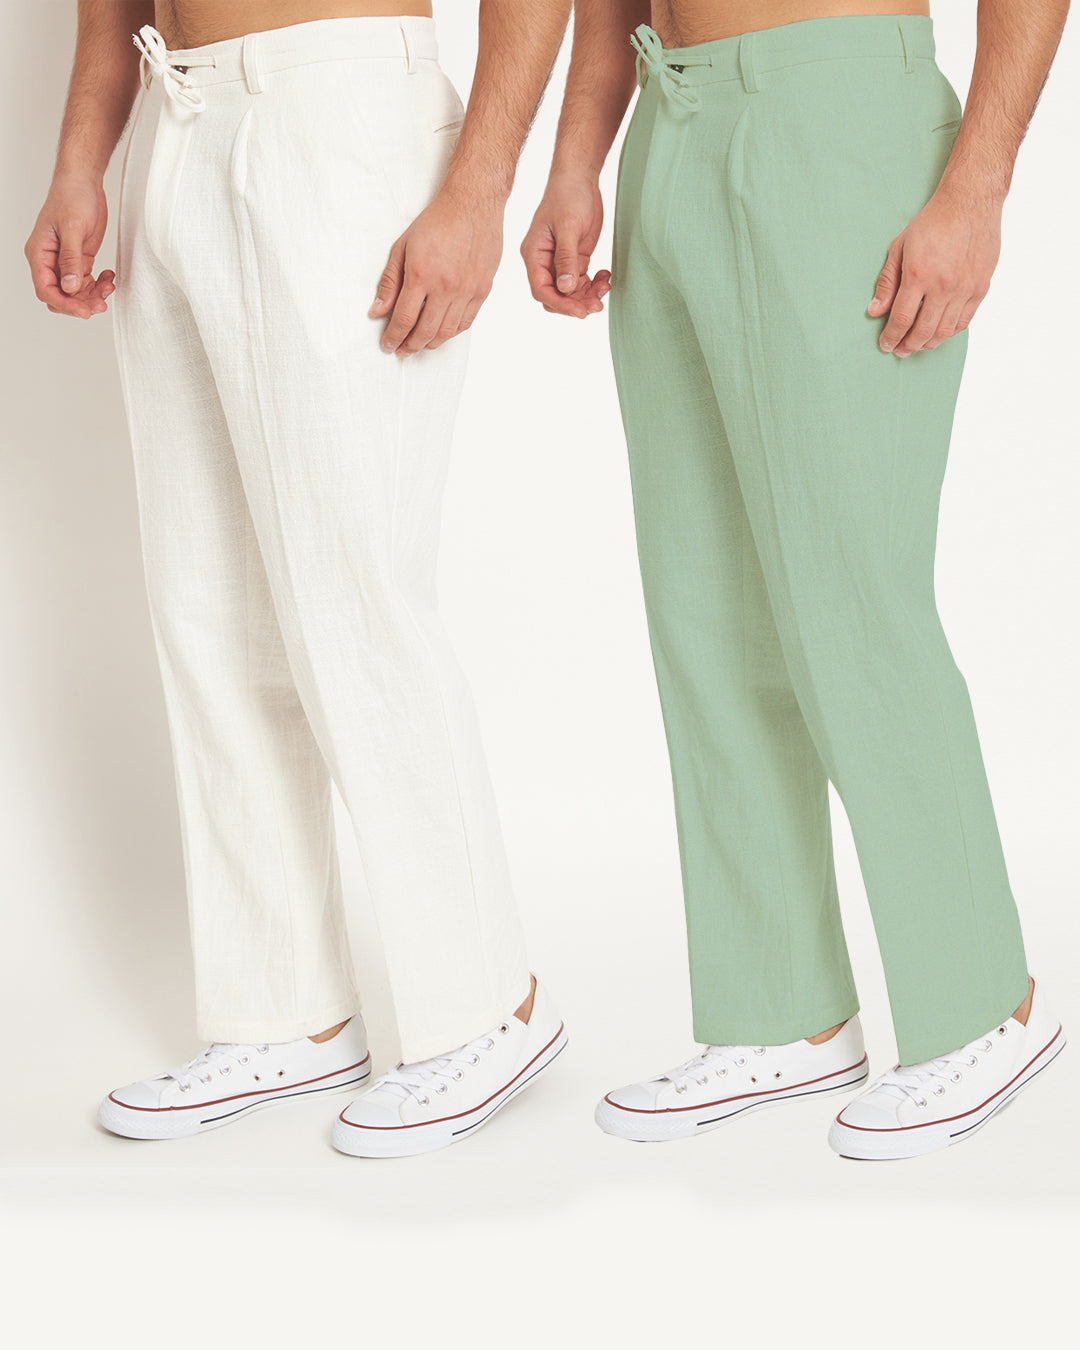 Combo: Casual Ease White & Spring Green Men's Pants - Set of 2